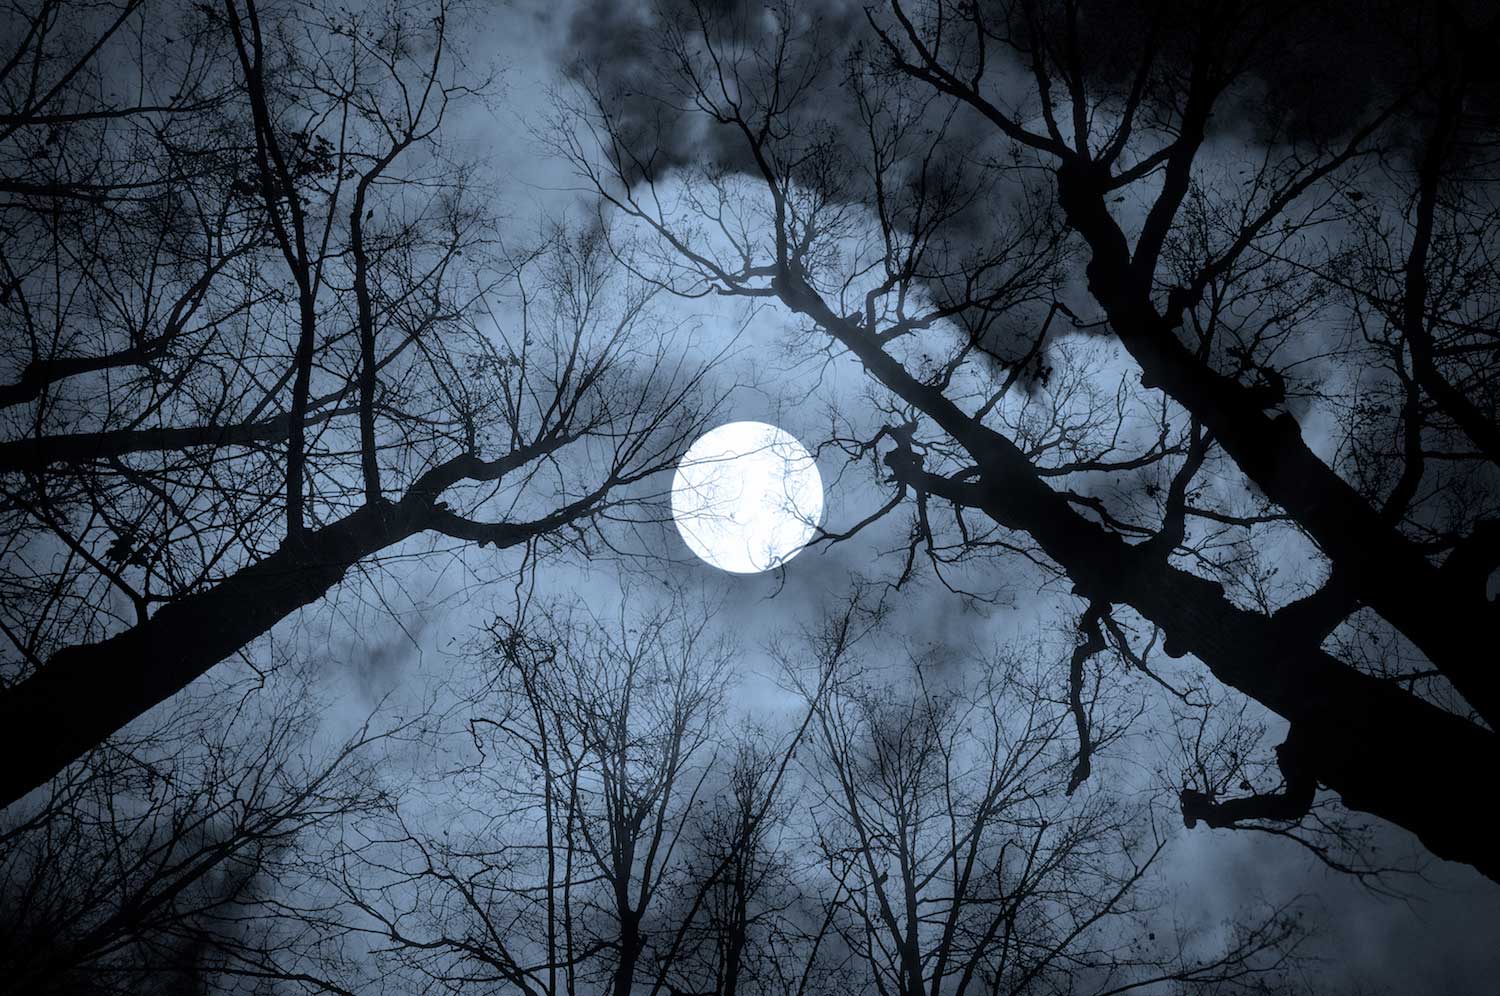 A full moon above bare tree branches in the night sky.